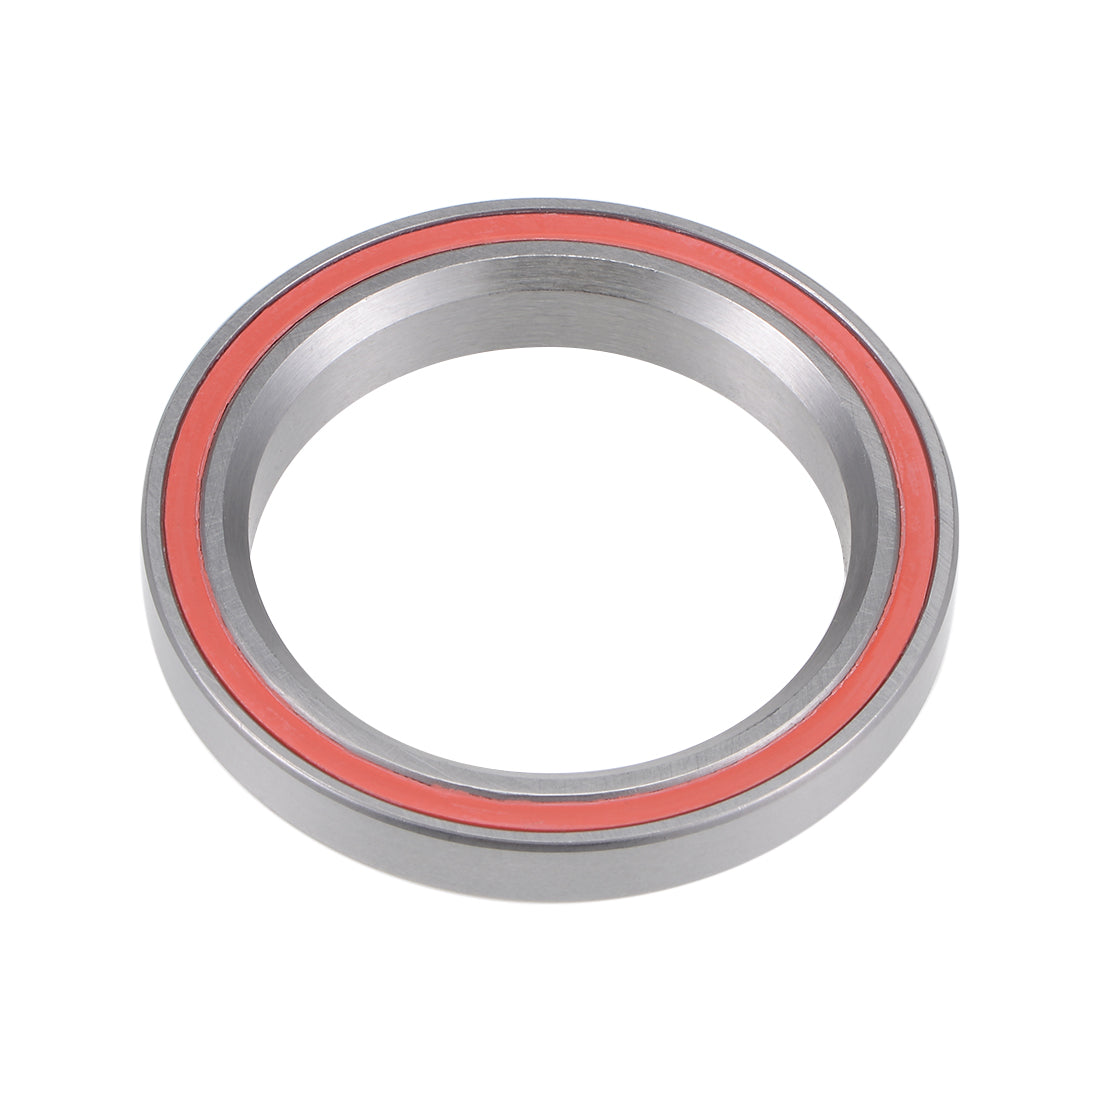 Uxcell Uxcell MH-P03K Bicycle Headset Bearing 30.15x41x6.5mm Sealed Chrome Steel Bearings